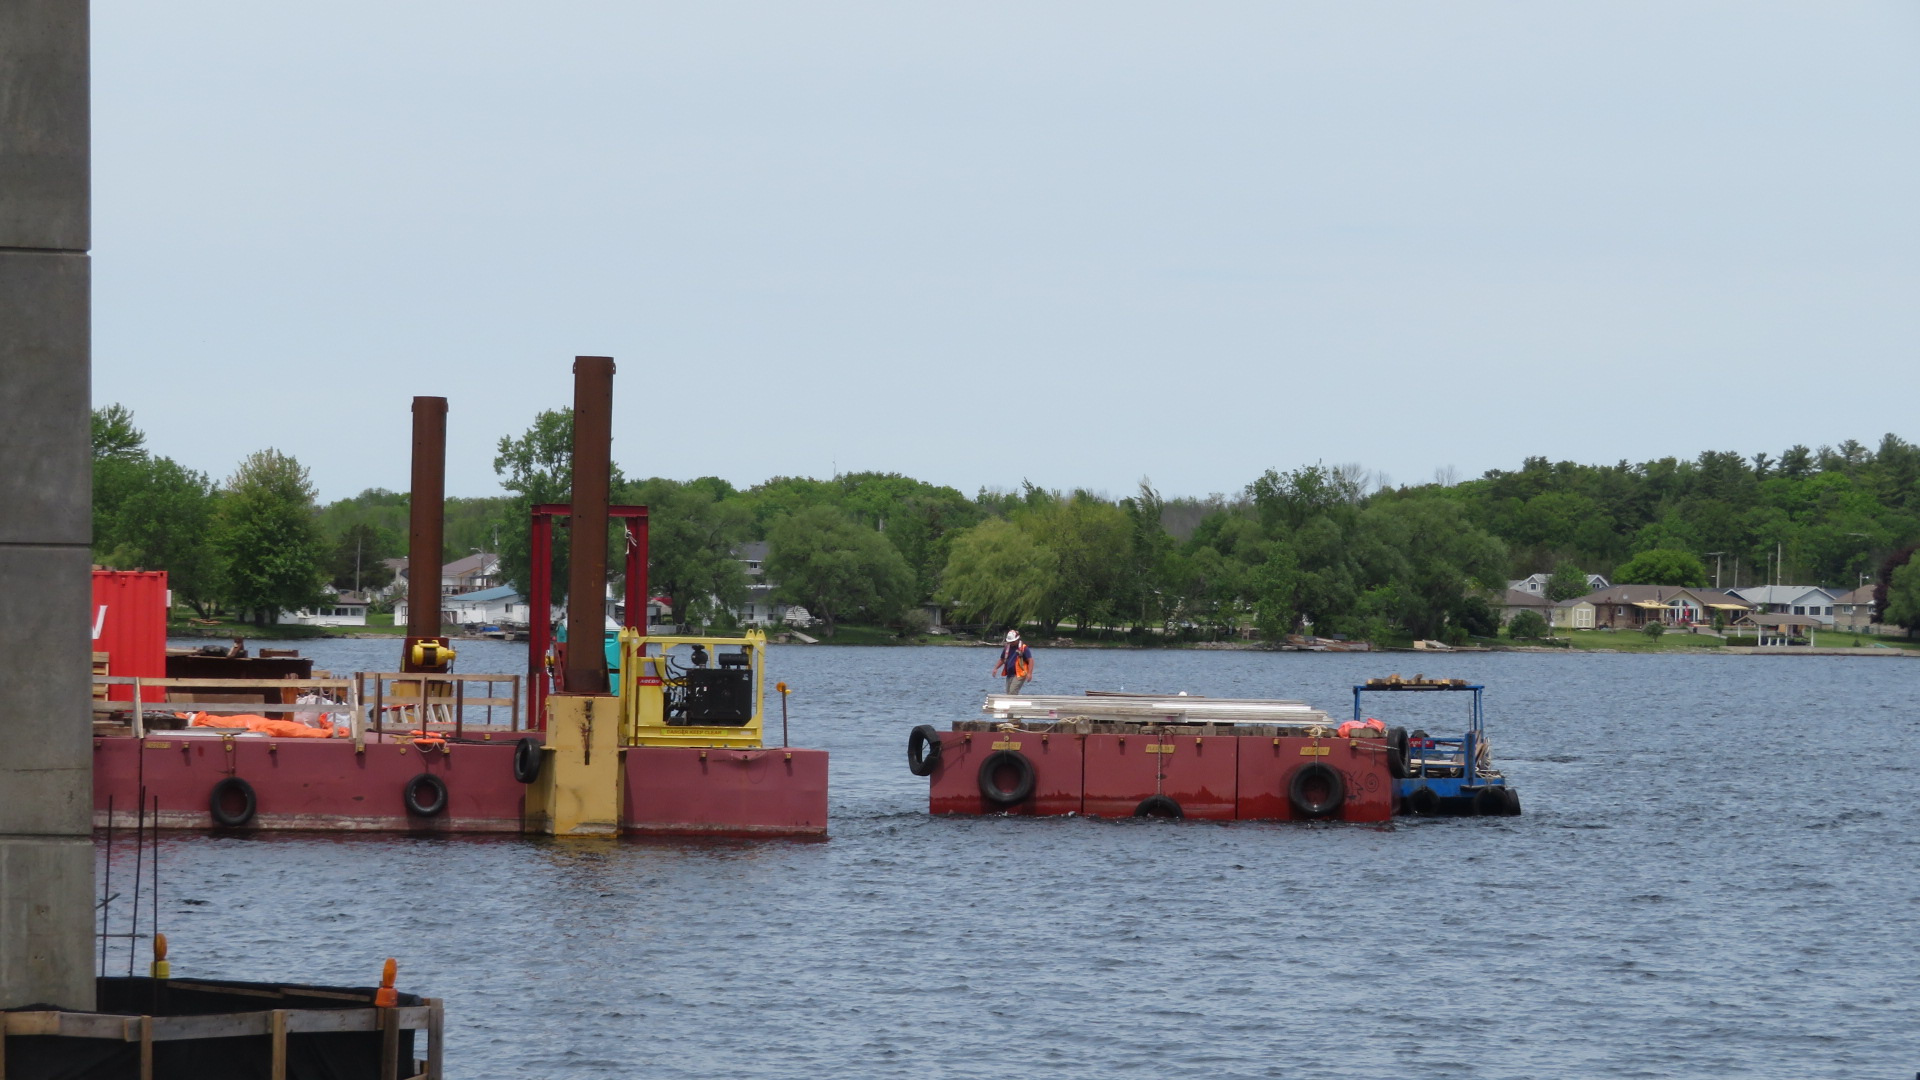 Delivering equipment with the service barge